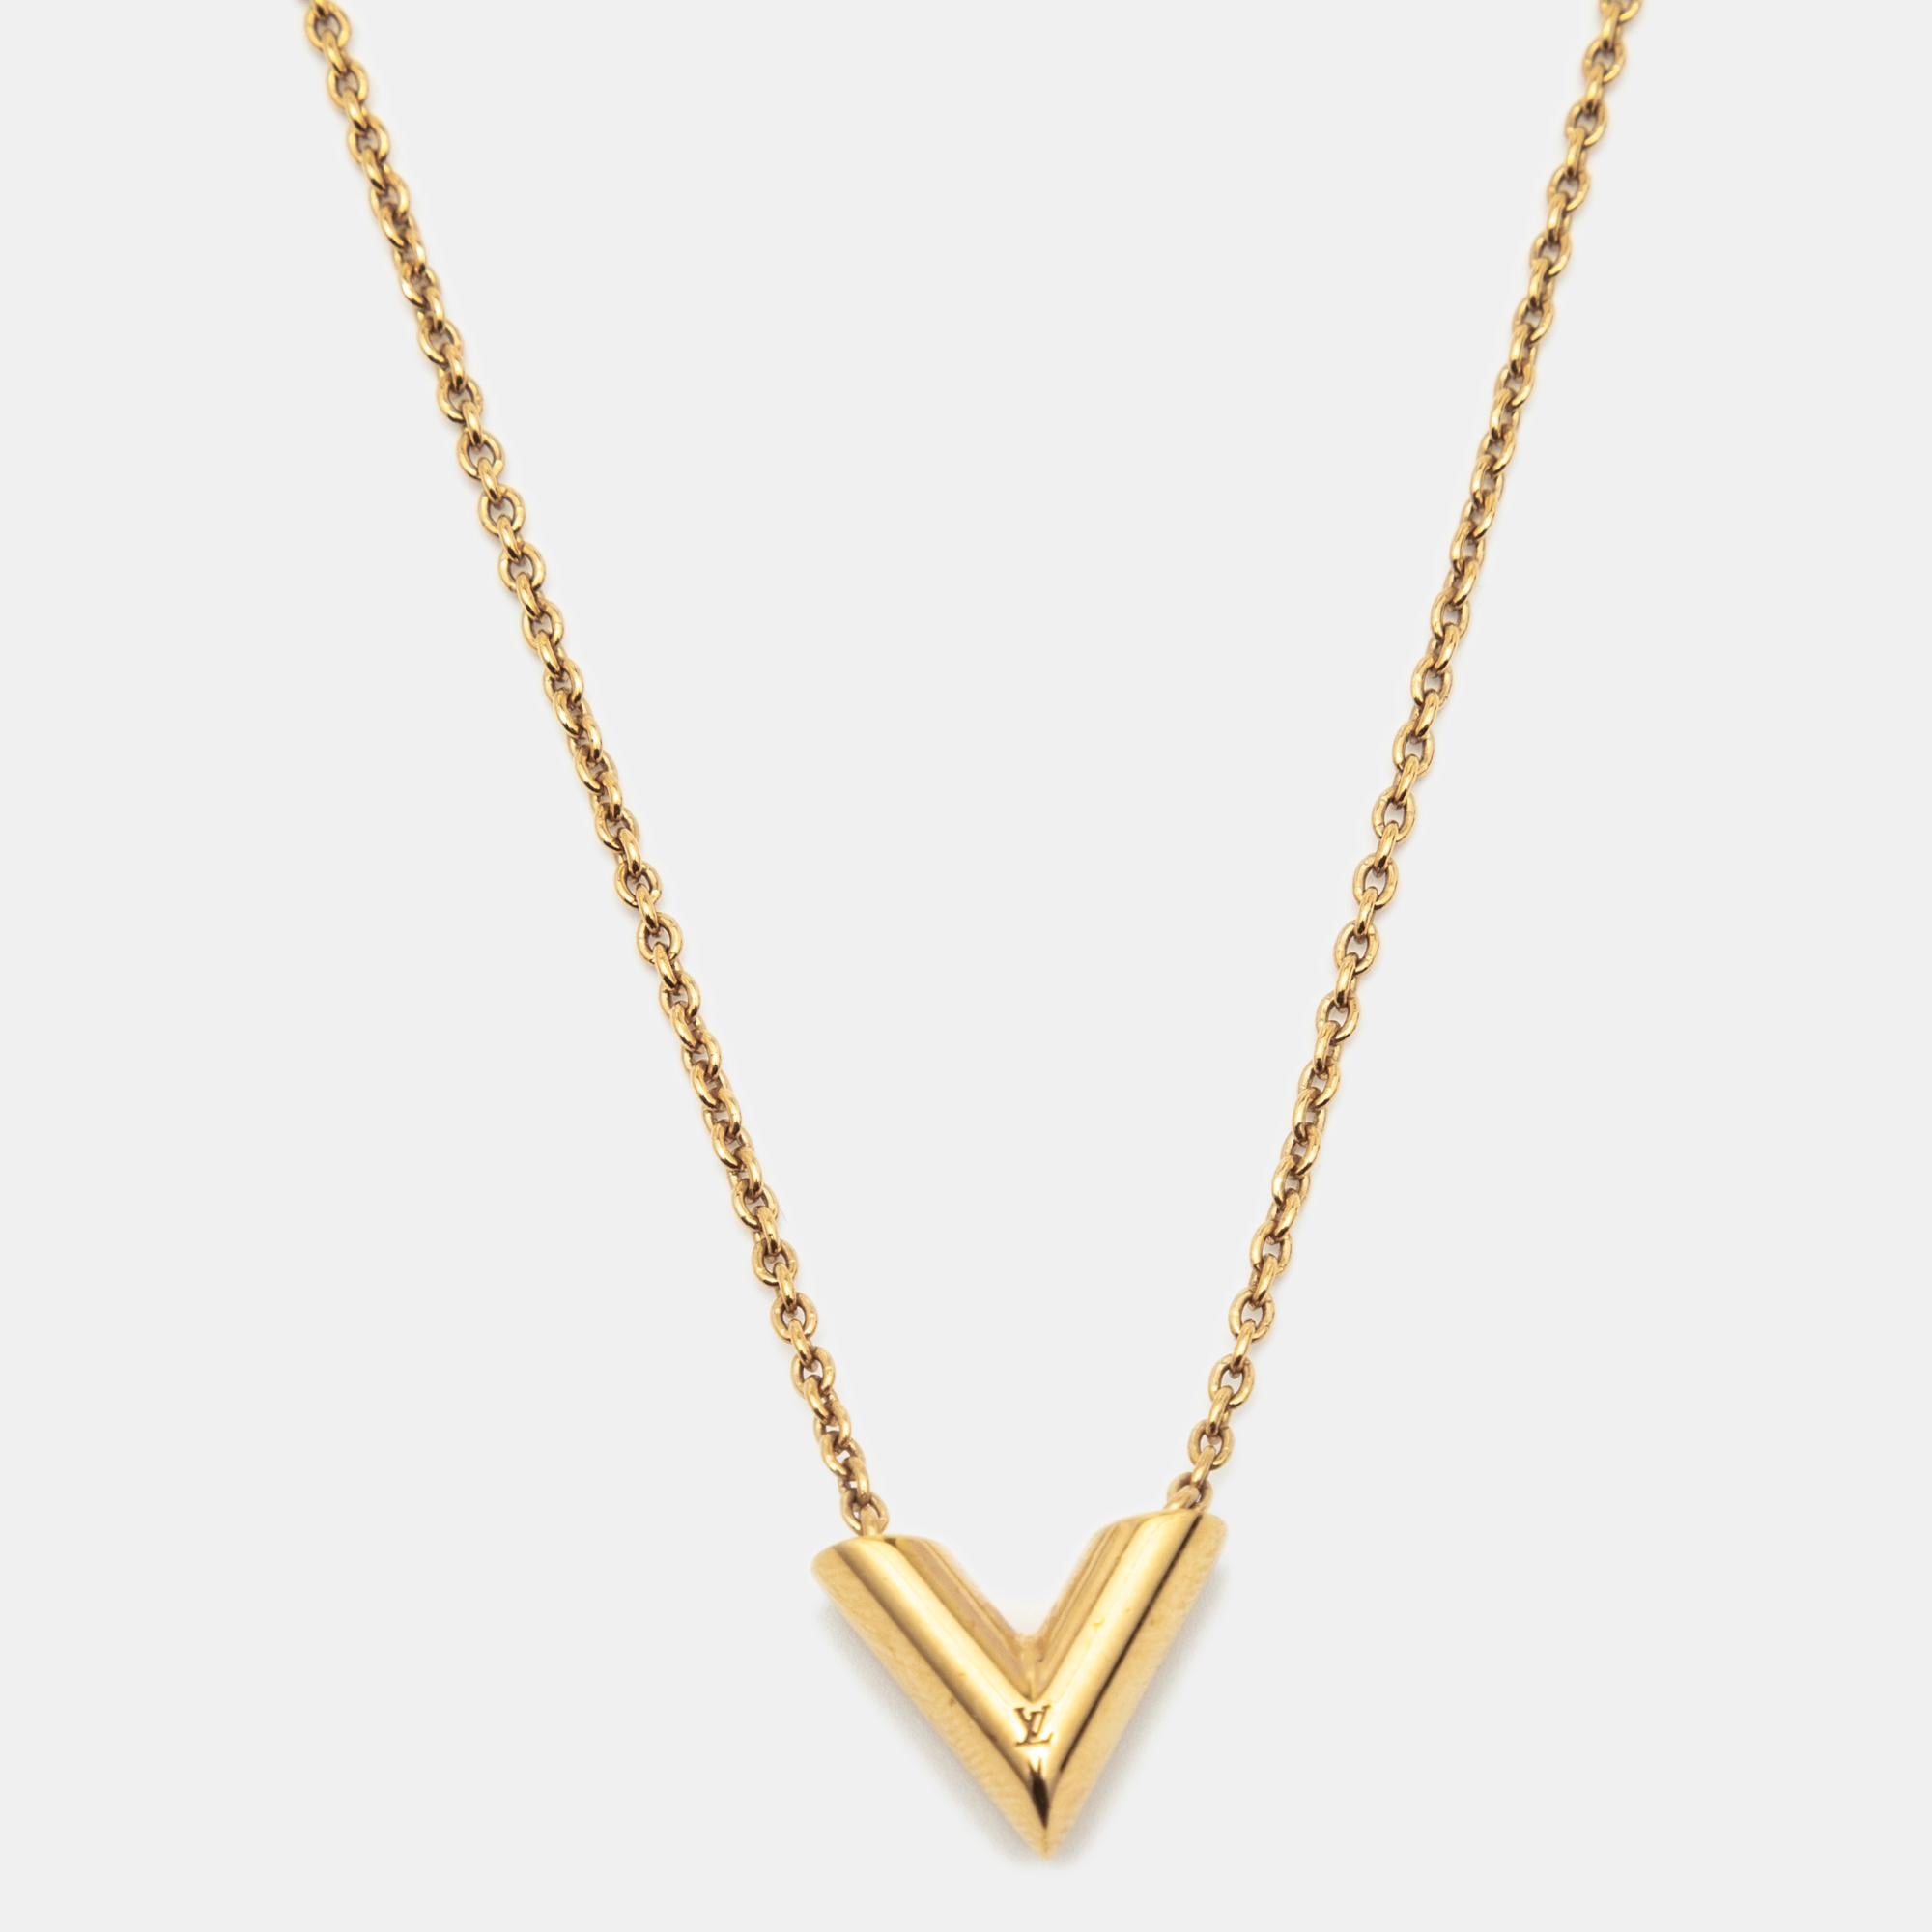 Delicately sculpted into a fine creation, this necklace from Louis Vuitton is here to make you look beautiful. It is set in gold-tone metal and features a V accent pendant. A secure lobster clasp finishes this LV necklace.

